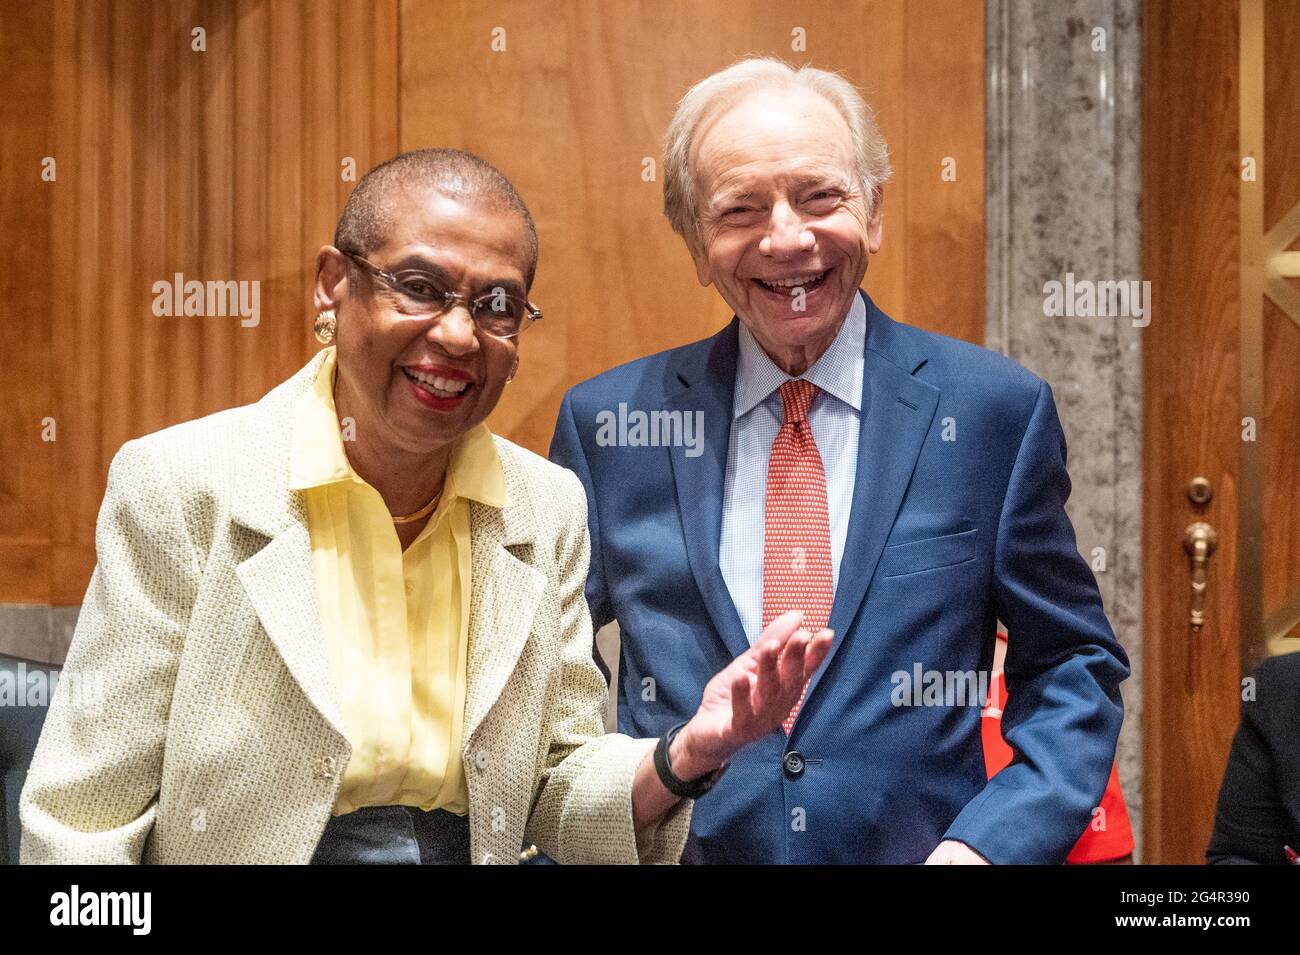 Washington, United States. 22nd June, 2021. U.S. Representative, Eleanor Holmes Norton (D-DC) and Former U.S. Senator, Joe Lieberman (I-CT) at a hearing of the Senate Homeland Security and Governmental Affairs committee at the U.S. Capitol. Credit: SOPA Images Limited/Alamy Live News Stock Photo